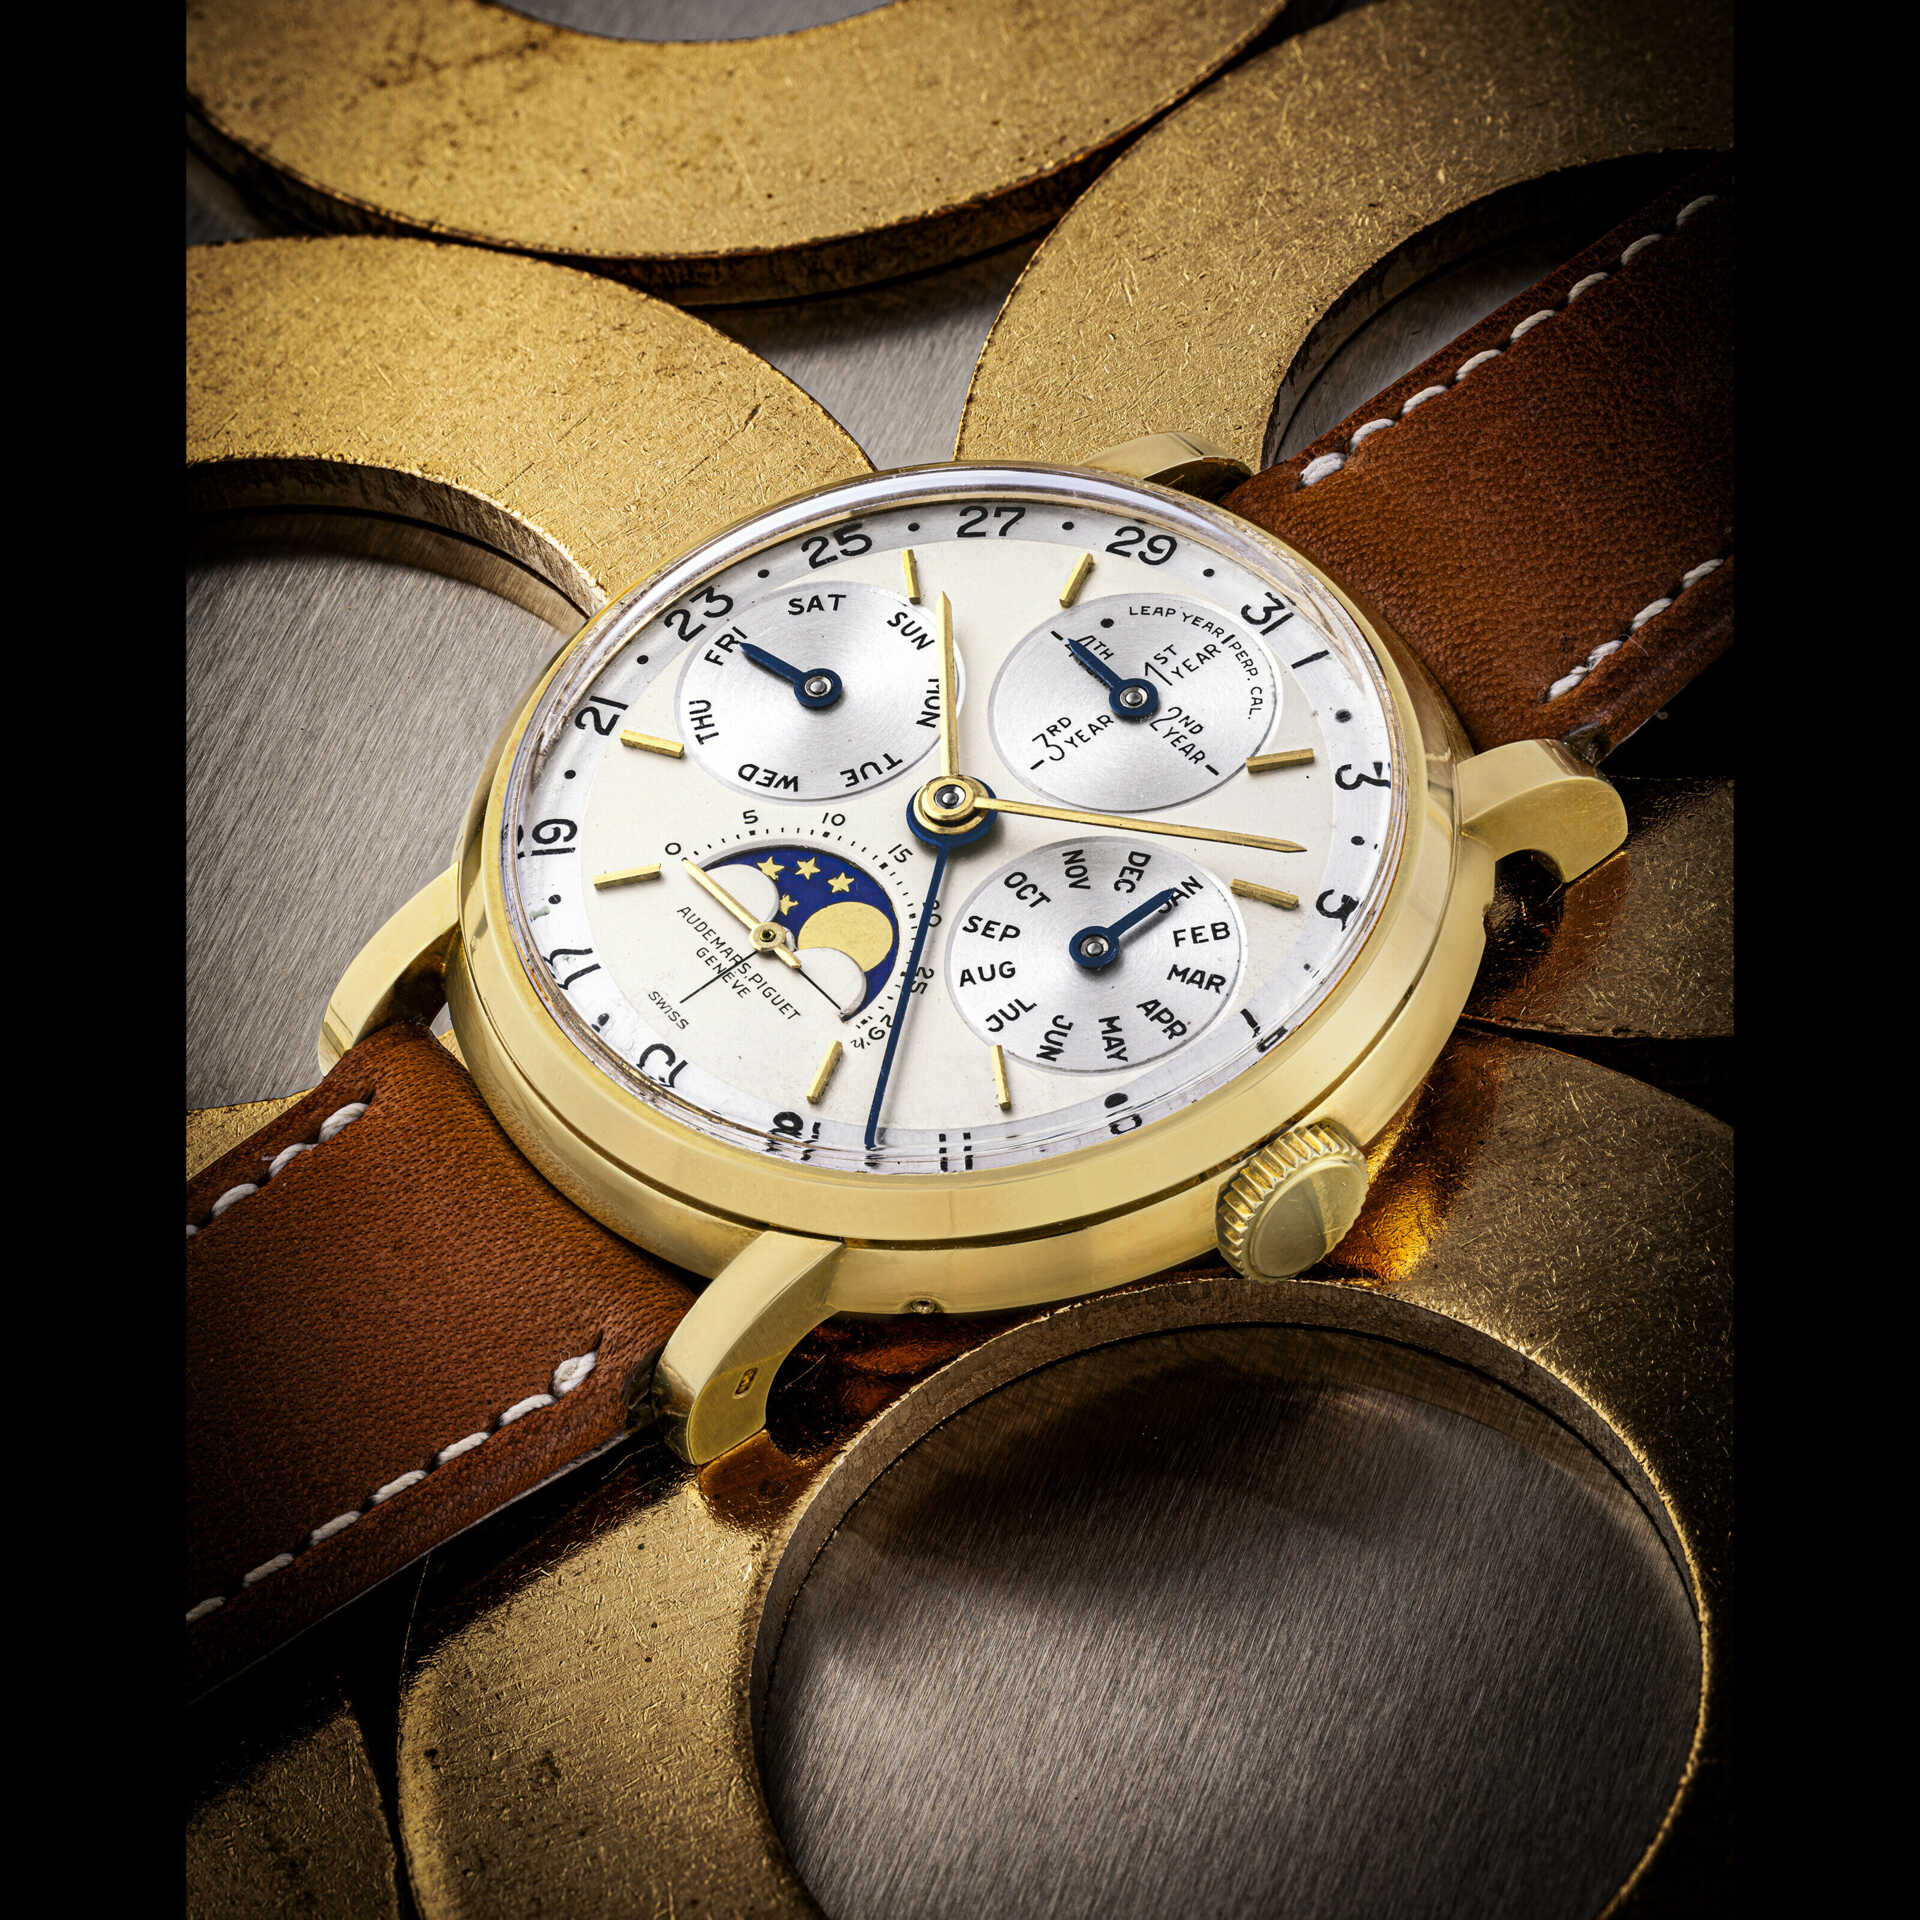 AUDEMARS PIGUET. AN EXTREMELY RARE AND IMPORTANT 18K GOLD PERPETUAL CALENDAR WRISTWATCH WITH LEAP YEAR INDICATION AND MOON PHASES